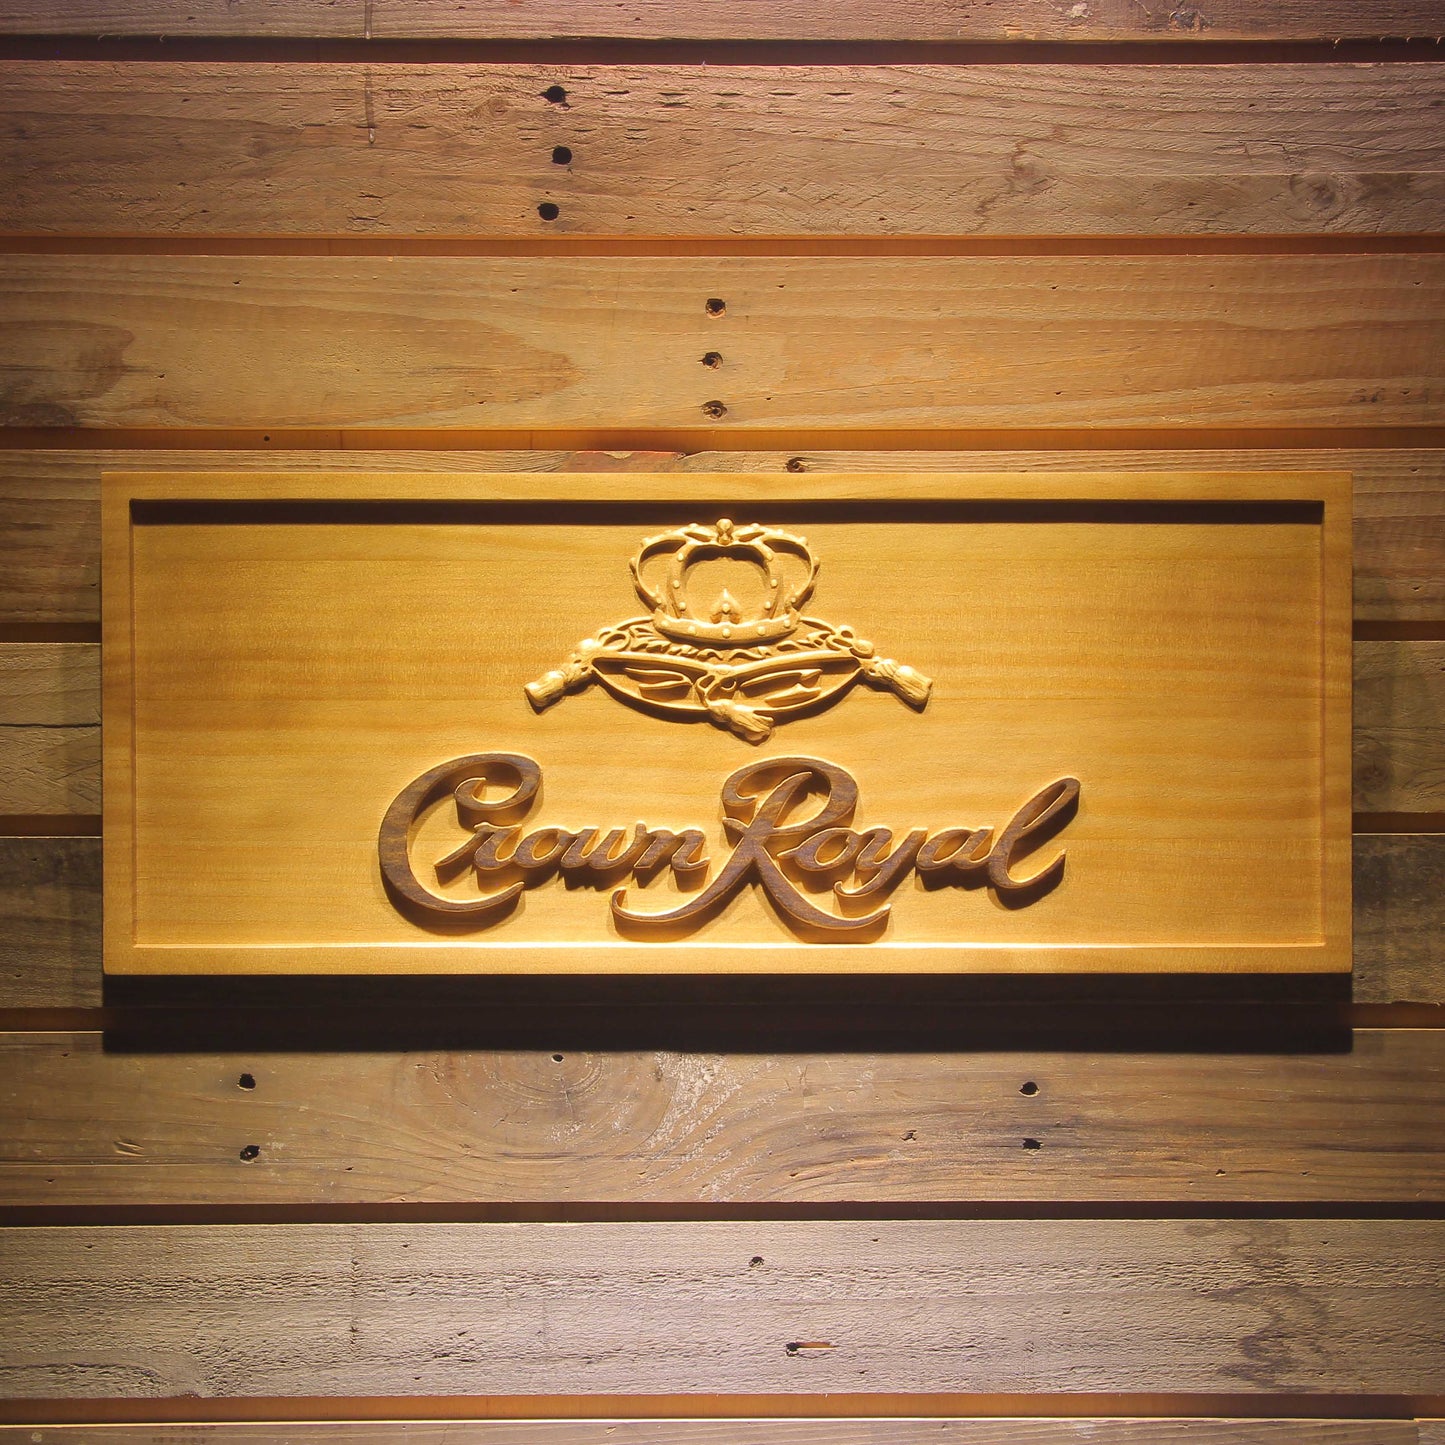 Crown Royal  3D Wooden Signs by Woody Signs Co. - Handmade Crafted Unique Wooden Creative